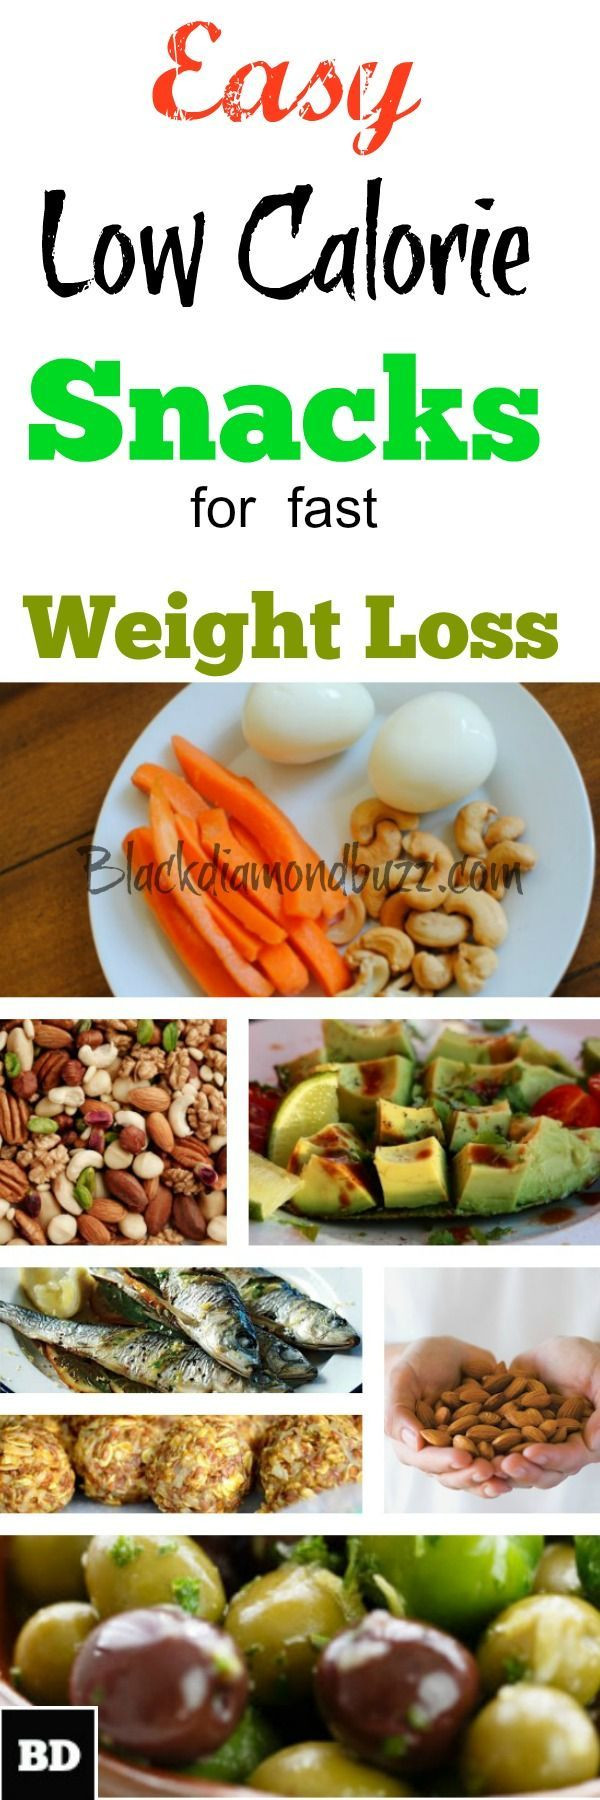 Healthy Low Cal Snacks
 Best 25 Weight loss snacks ideas on Pinterest